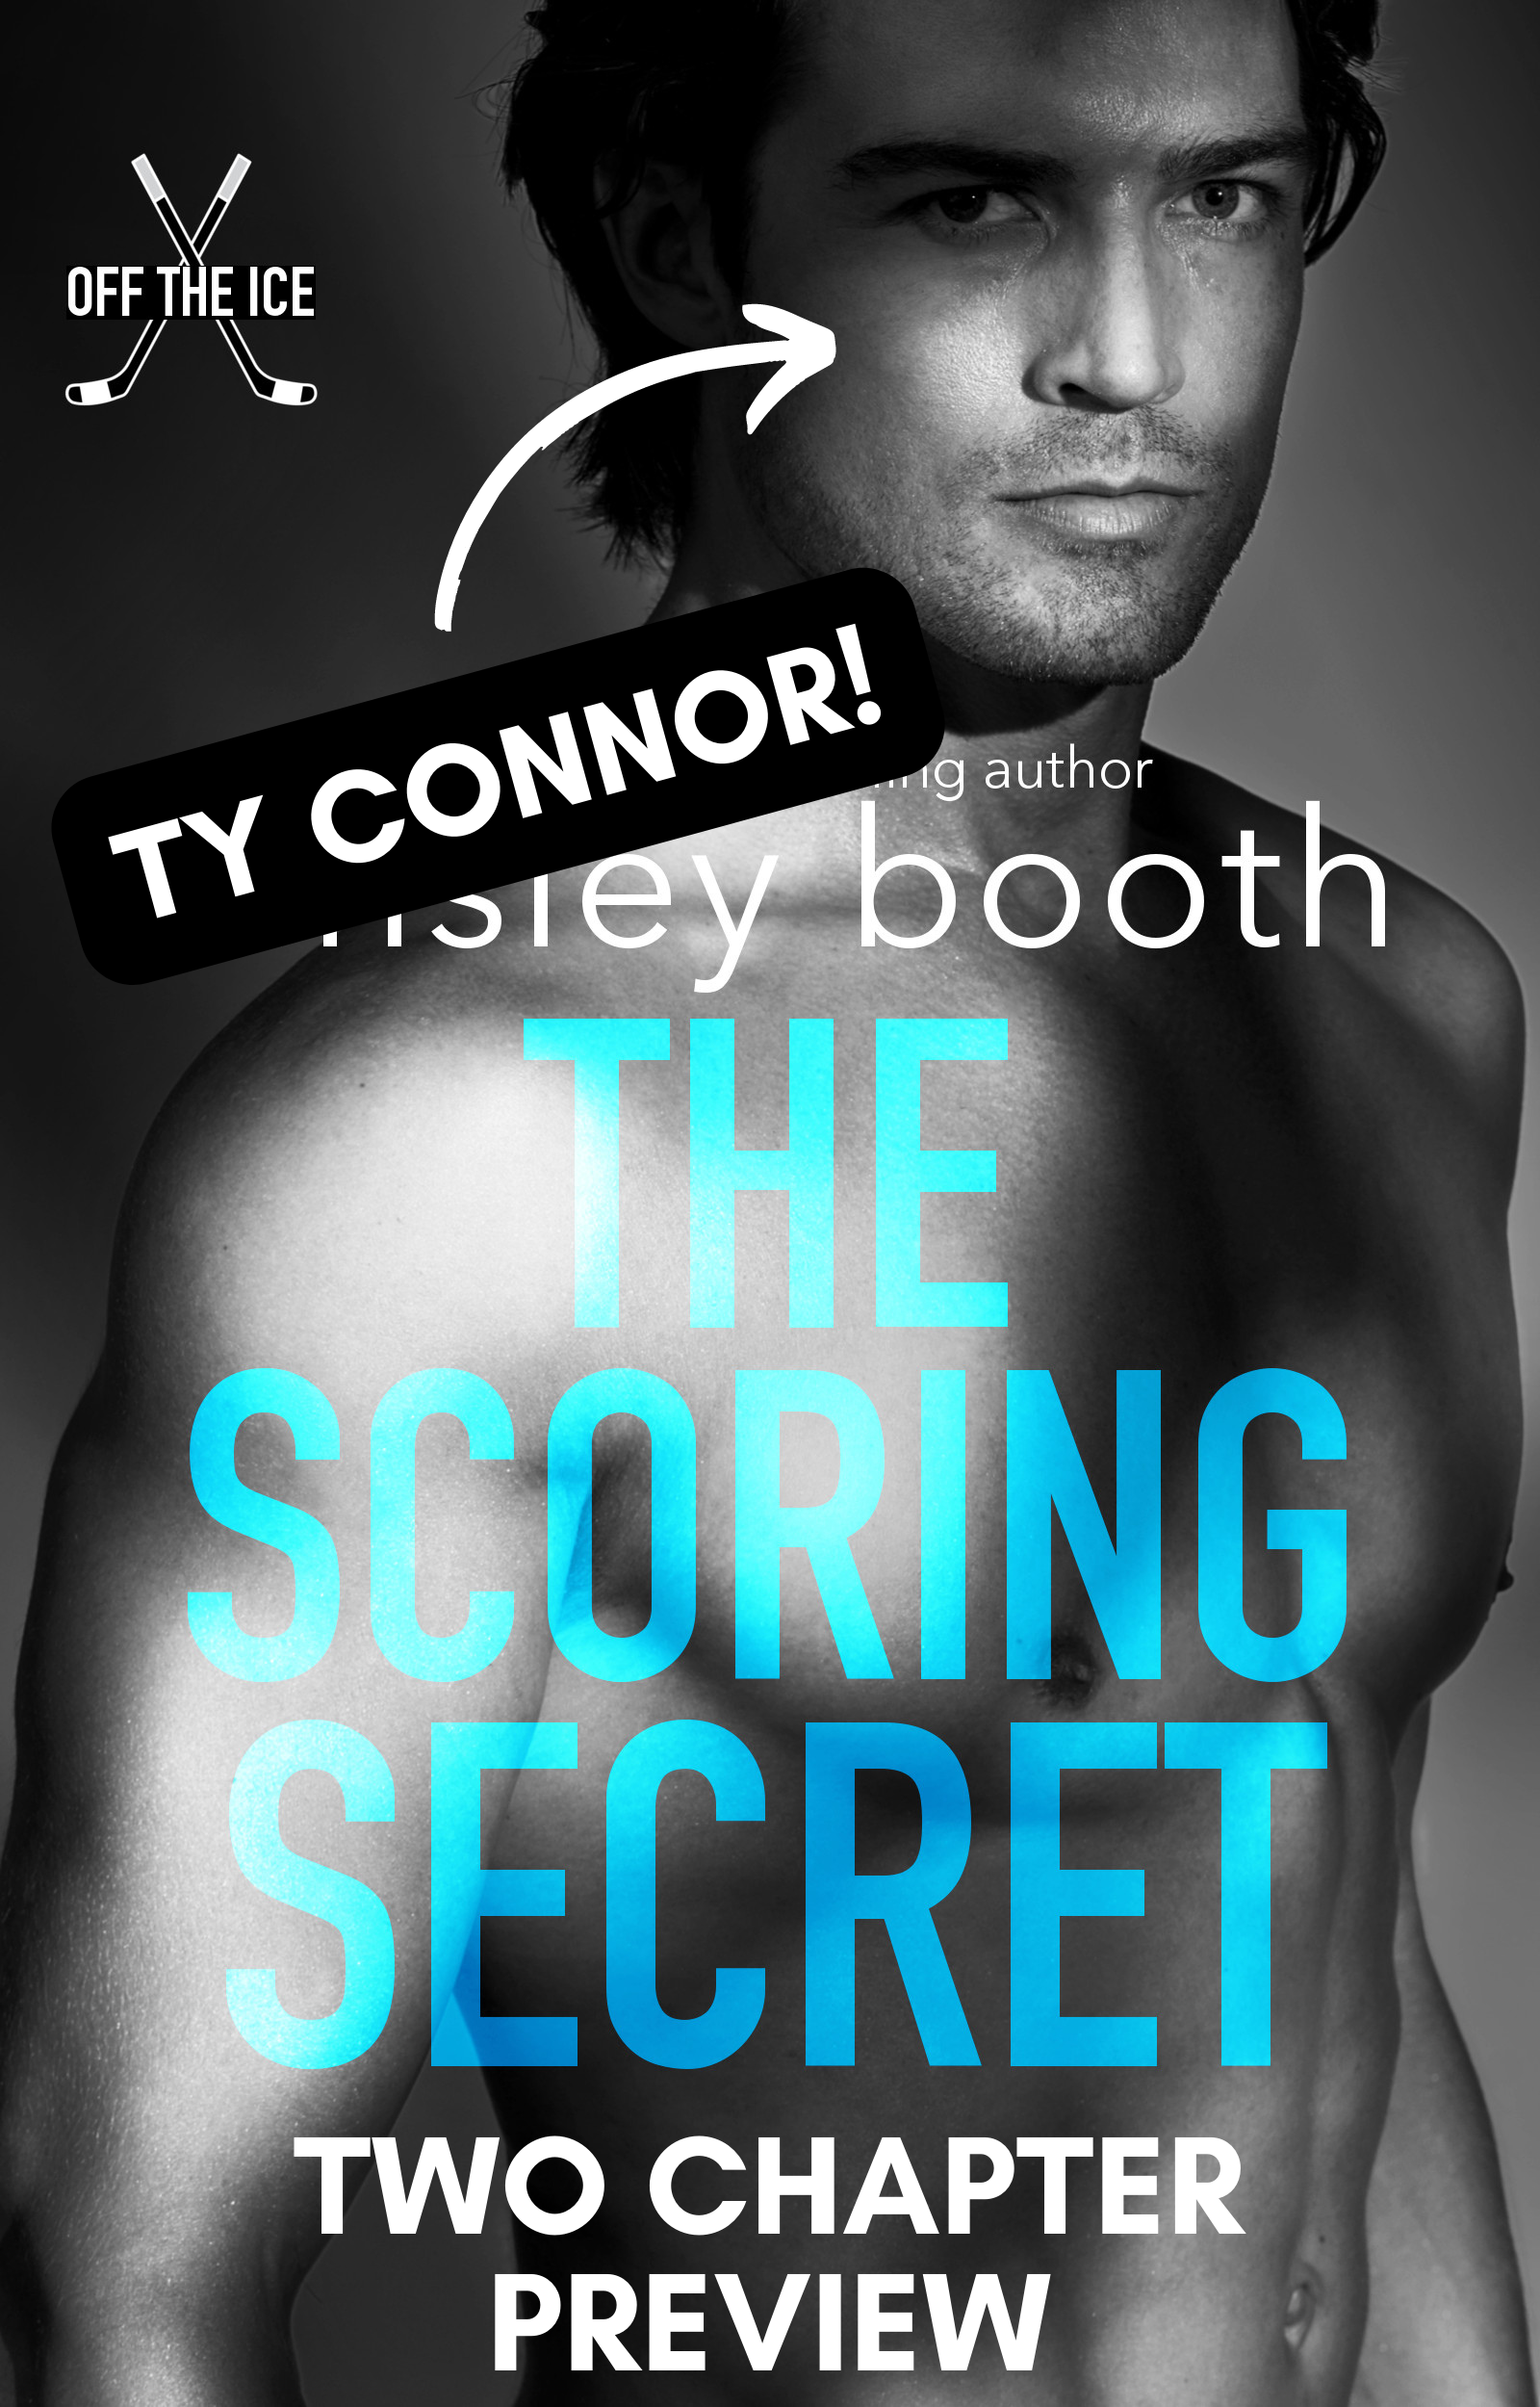 Two chapter preview of The Scoring Secret (Ty Connor's book)